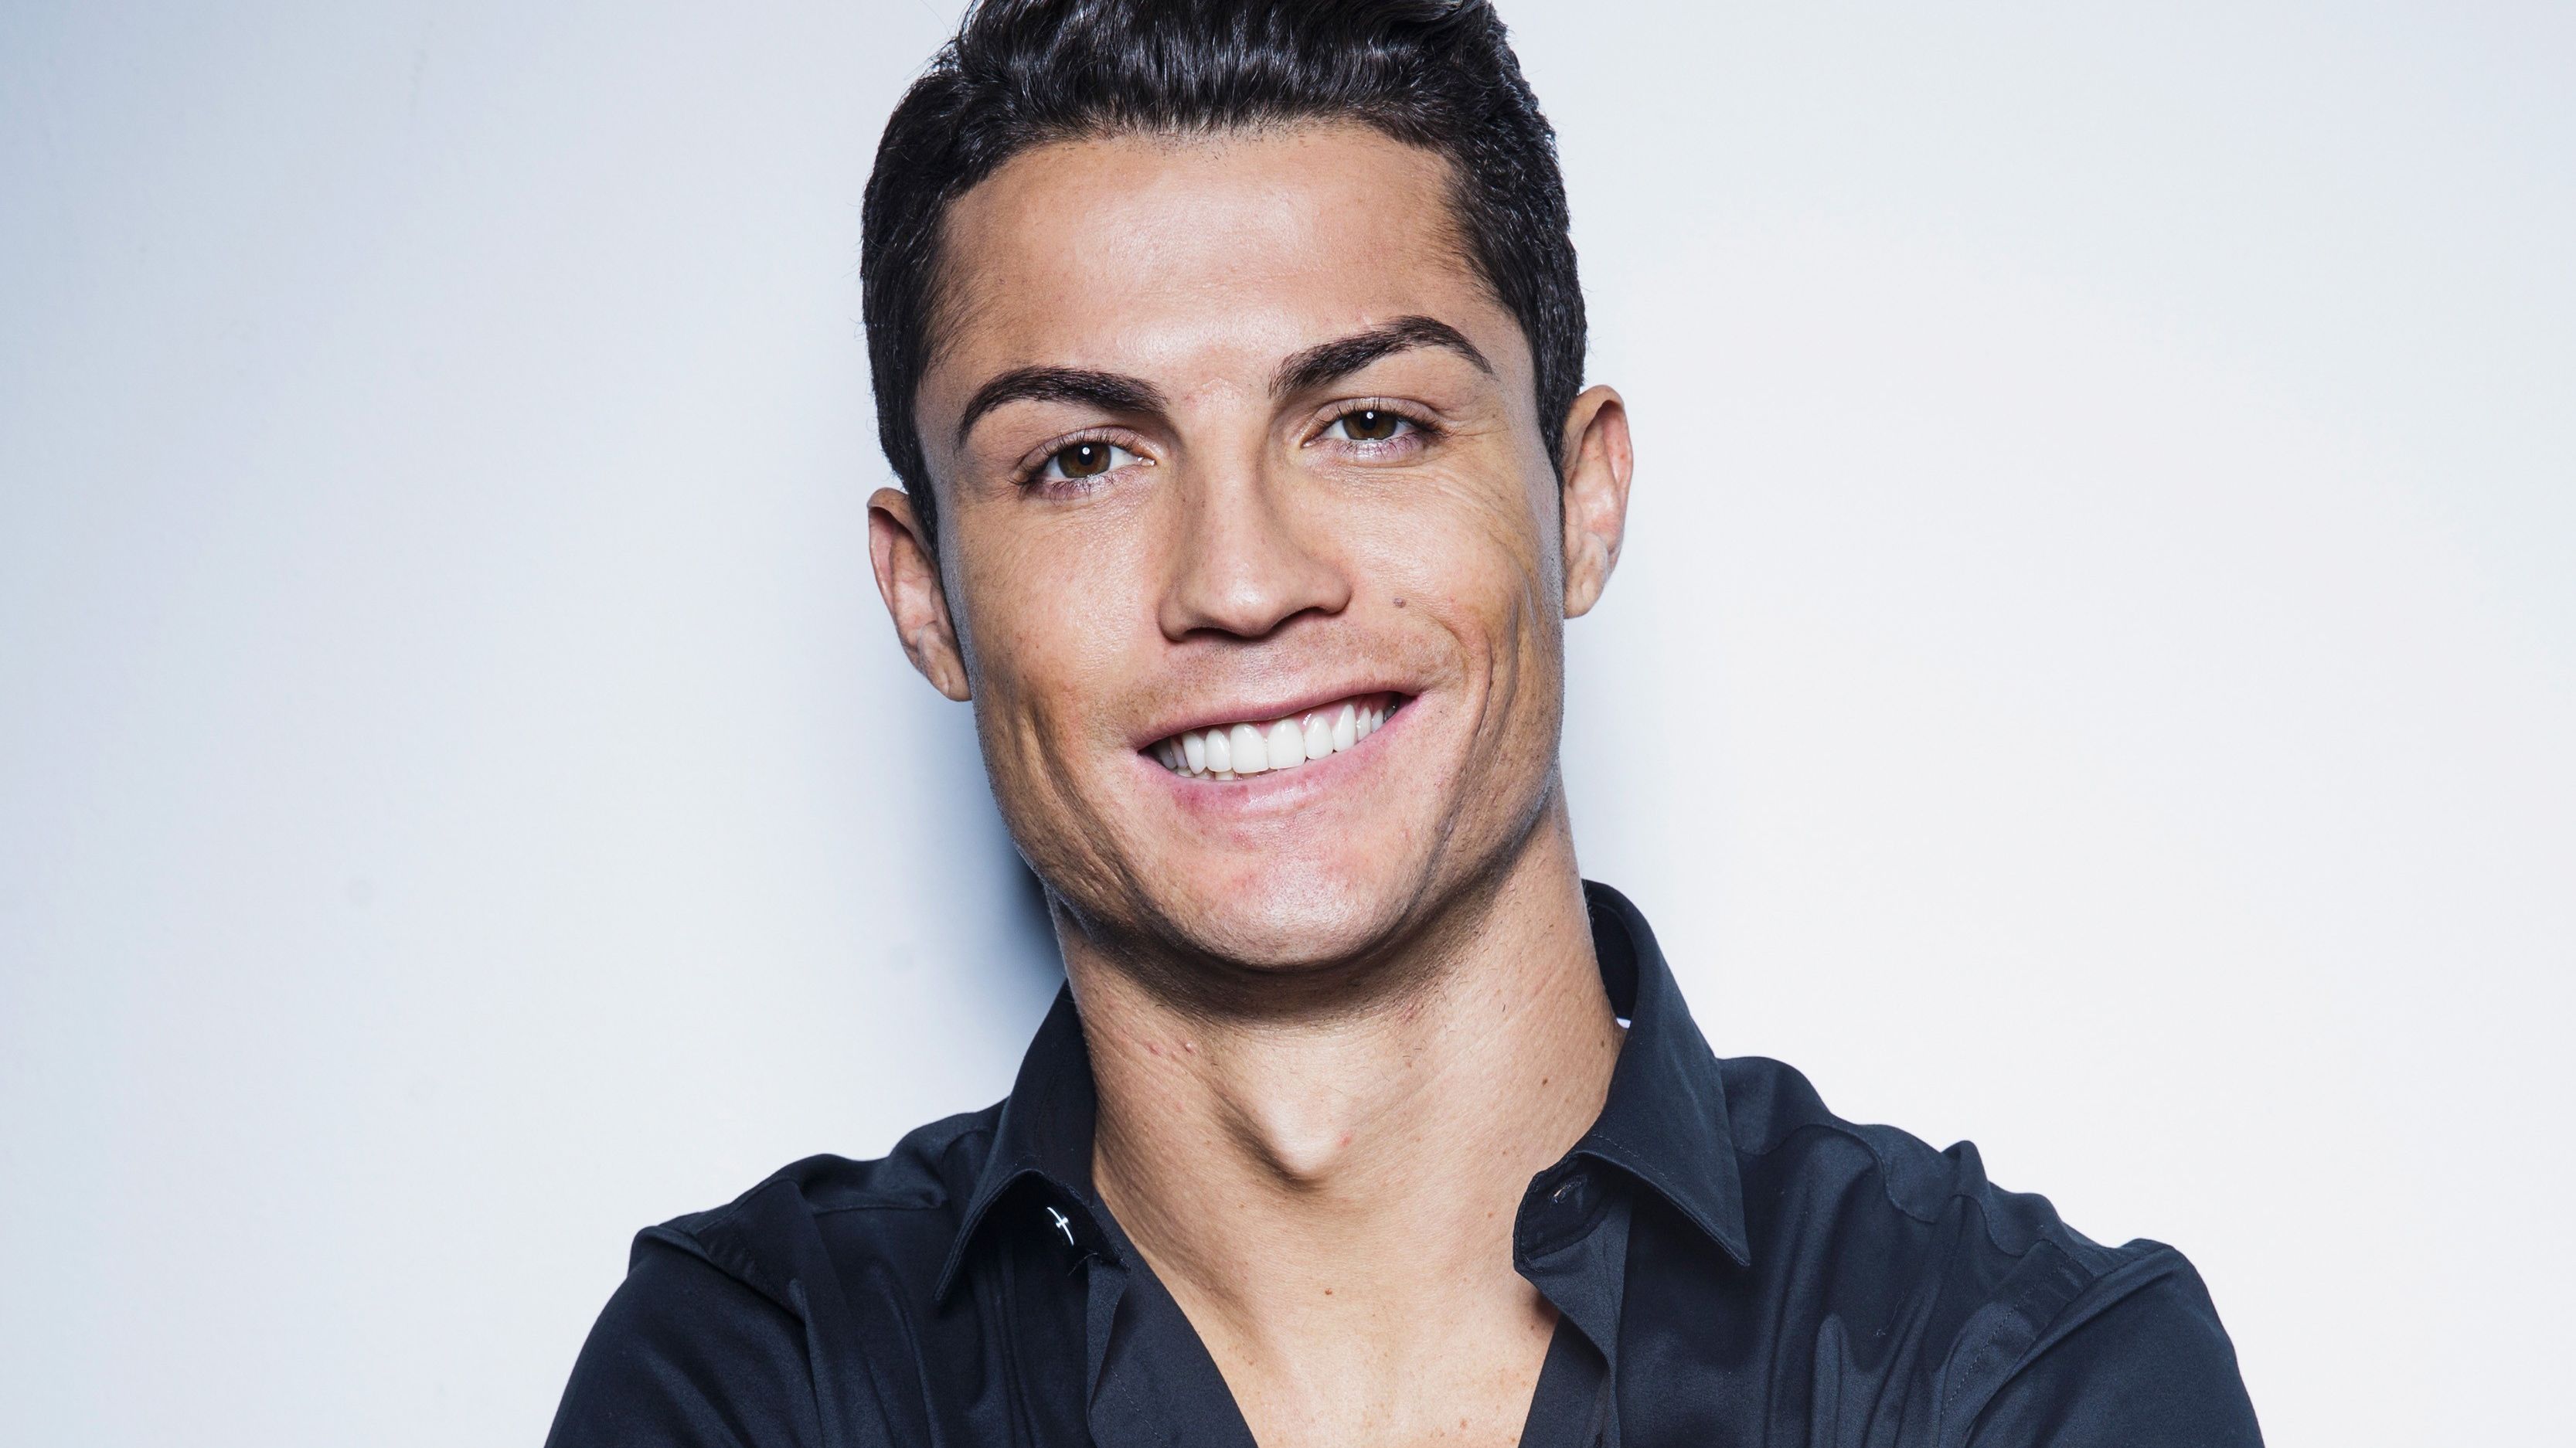 Cristiano Ronaldo GQ 4k, HD Celebrities, 4k Wallpaper, Image, Background, Photo and Picture